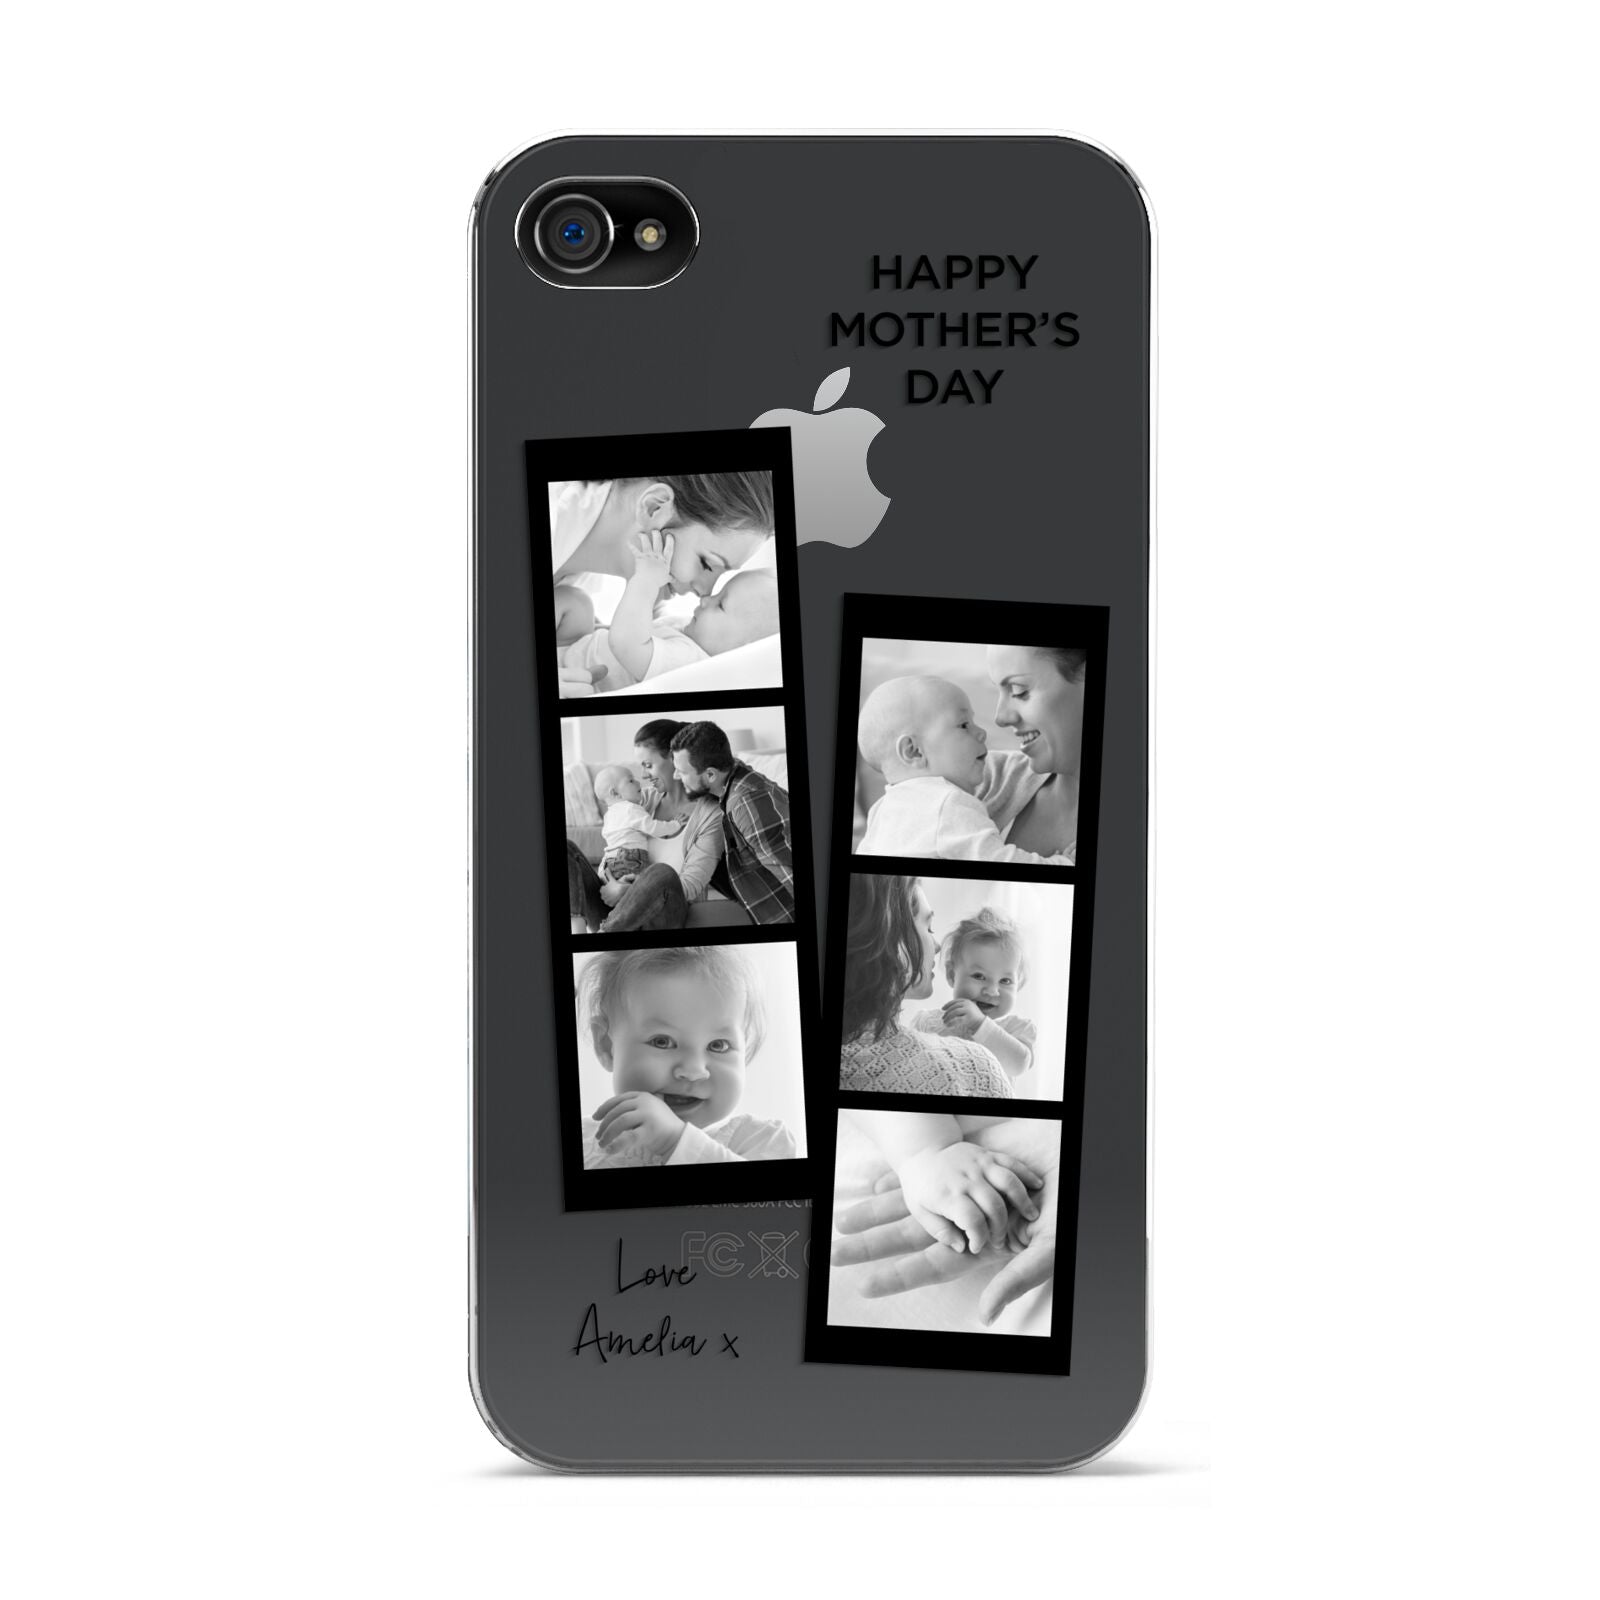 Mothers Day Photo Strip Apple iPhone 4s Case